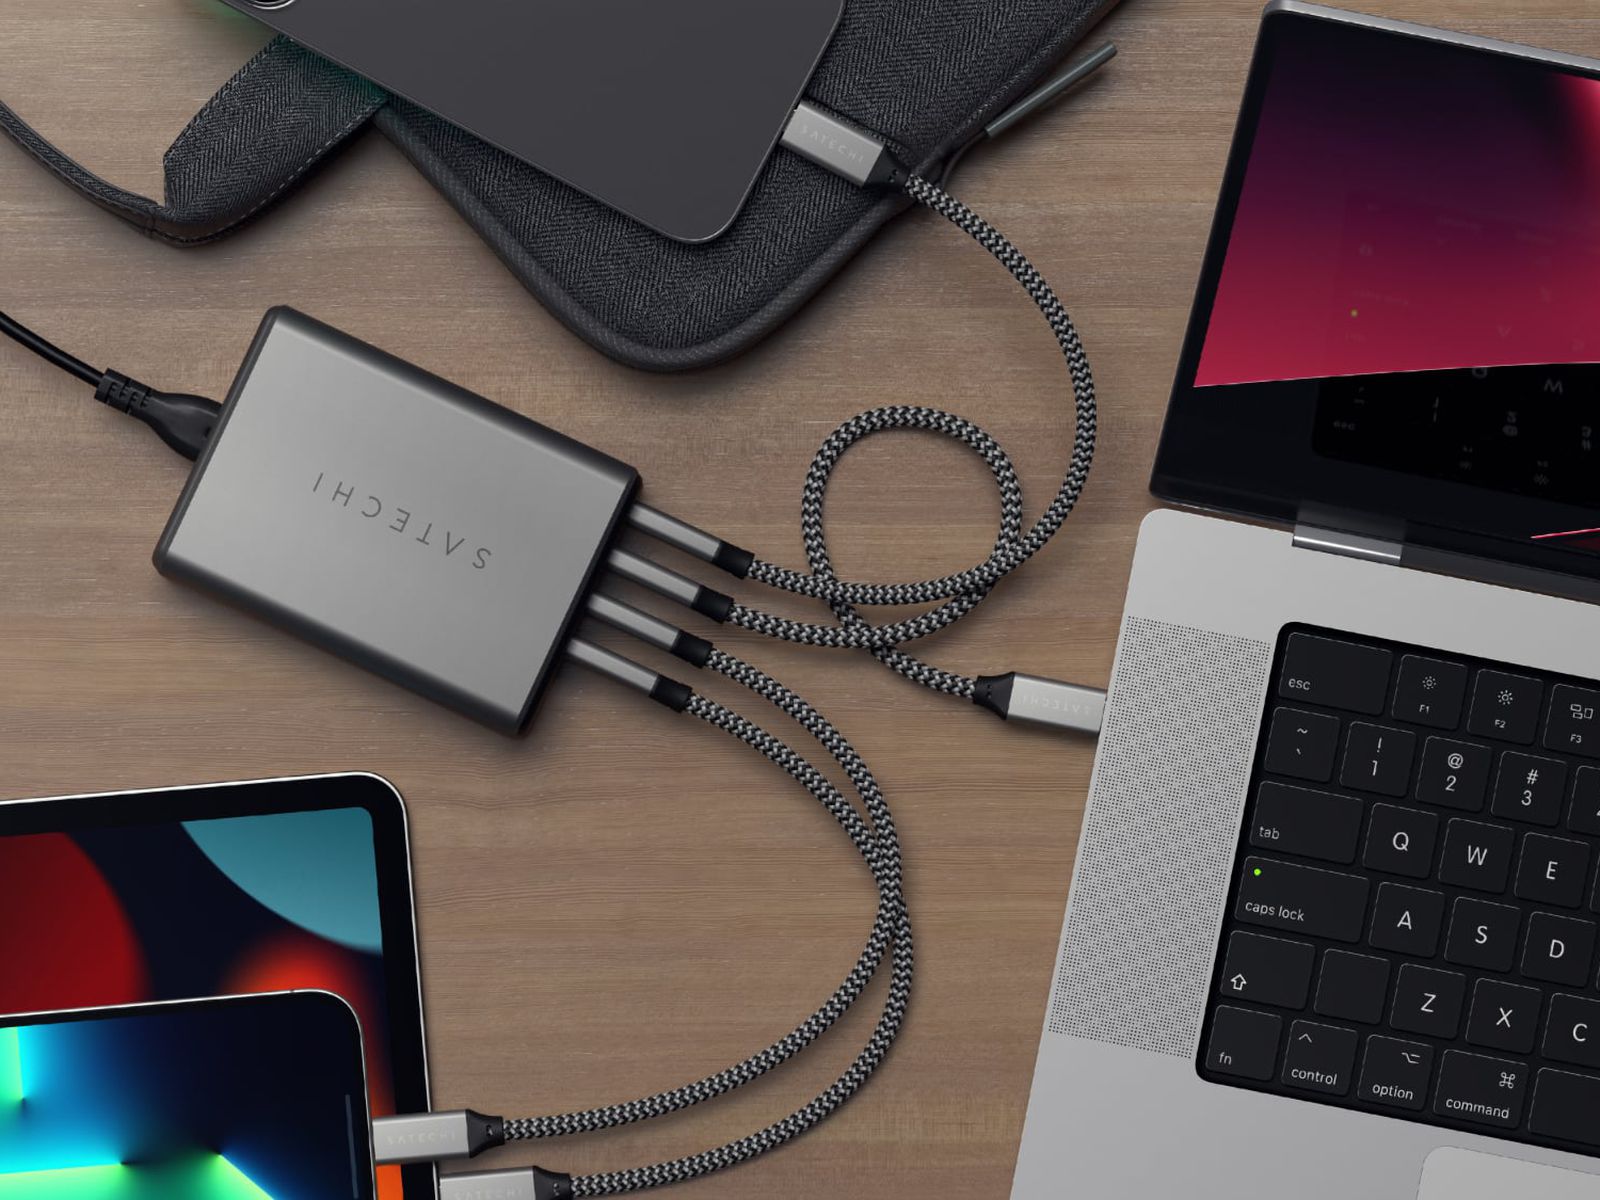 Badekar sikkerhed Donation CES 2022: Satechi Launches 165W USB-C 4-Port GaN Charger - MacRumors